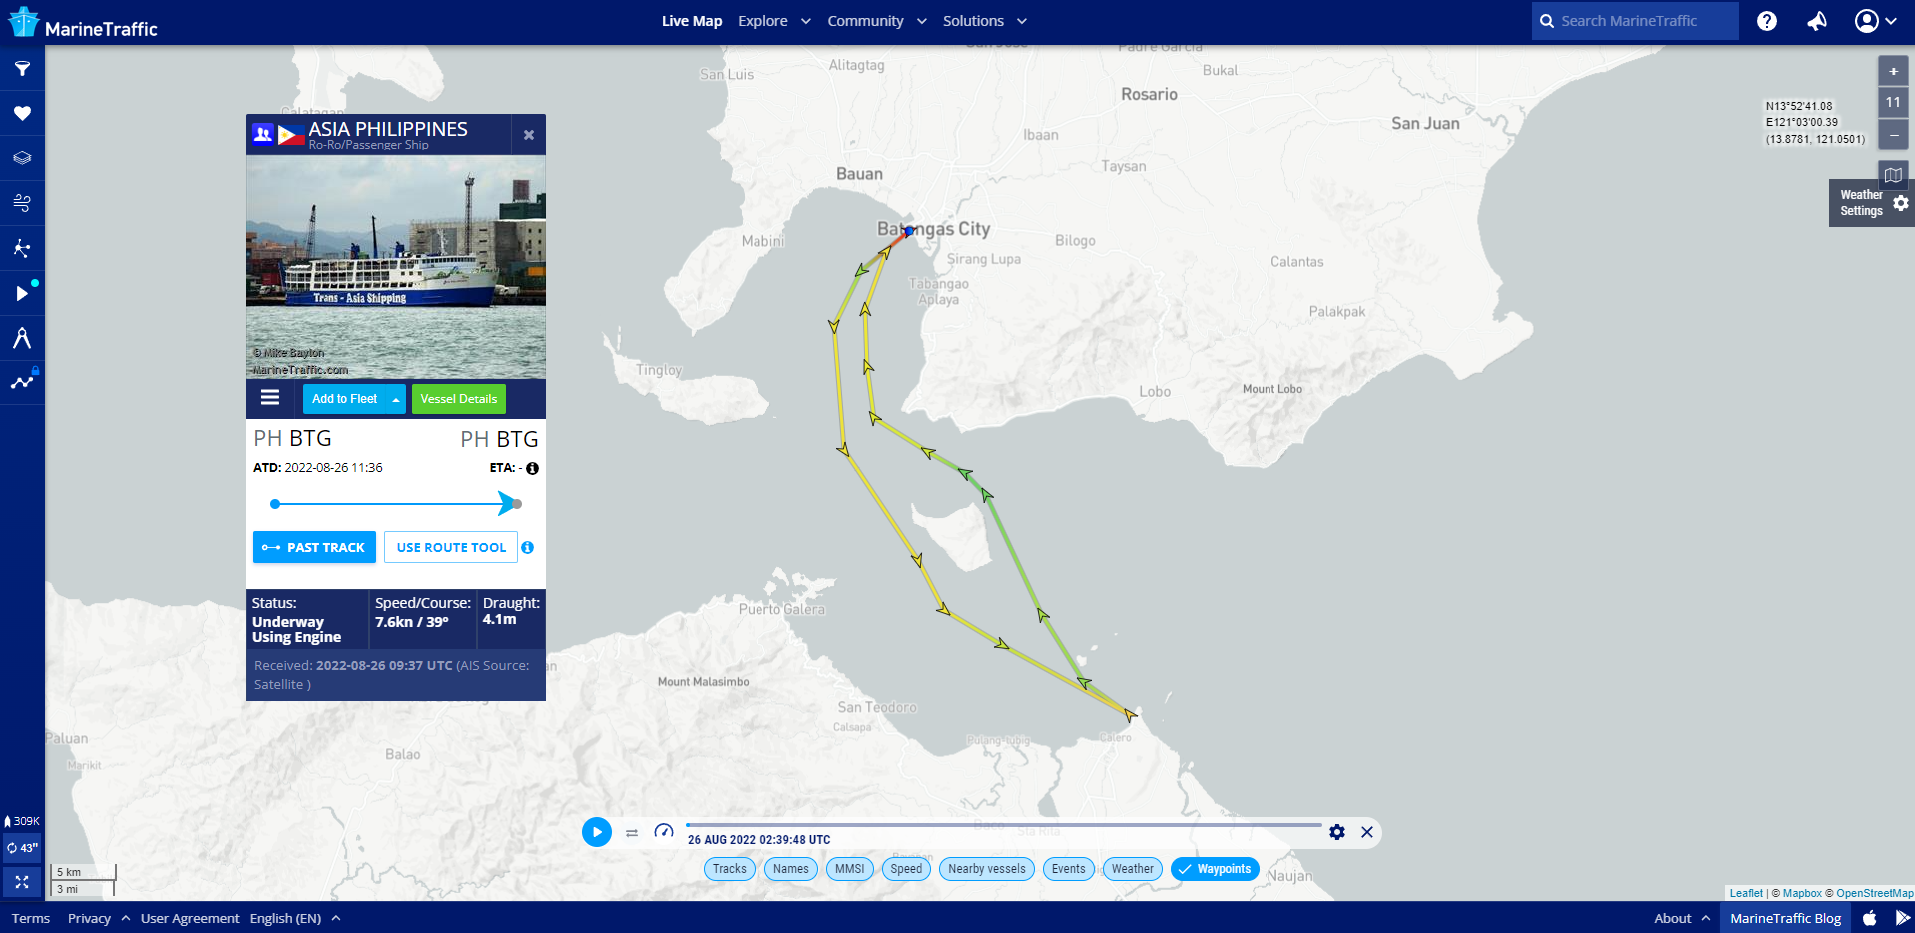 Photo and route of MV Asia Philippines as seen on marinetraffic.com